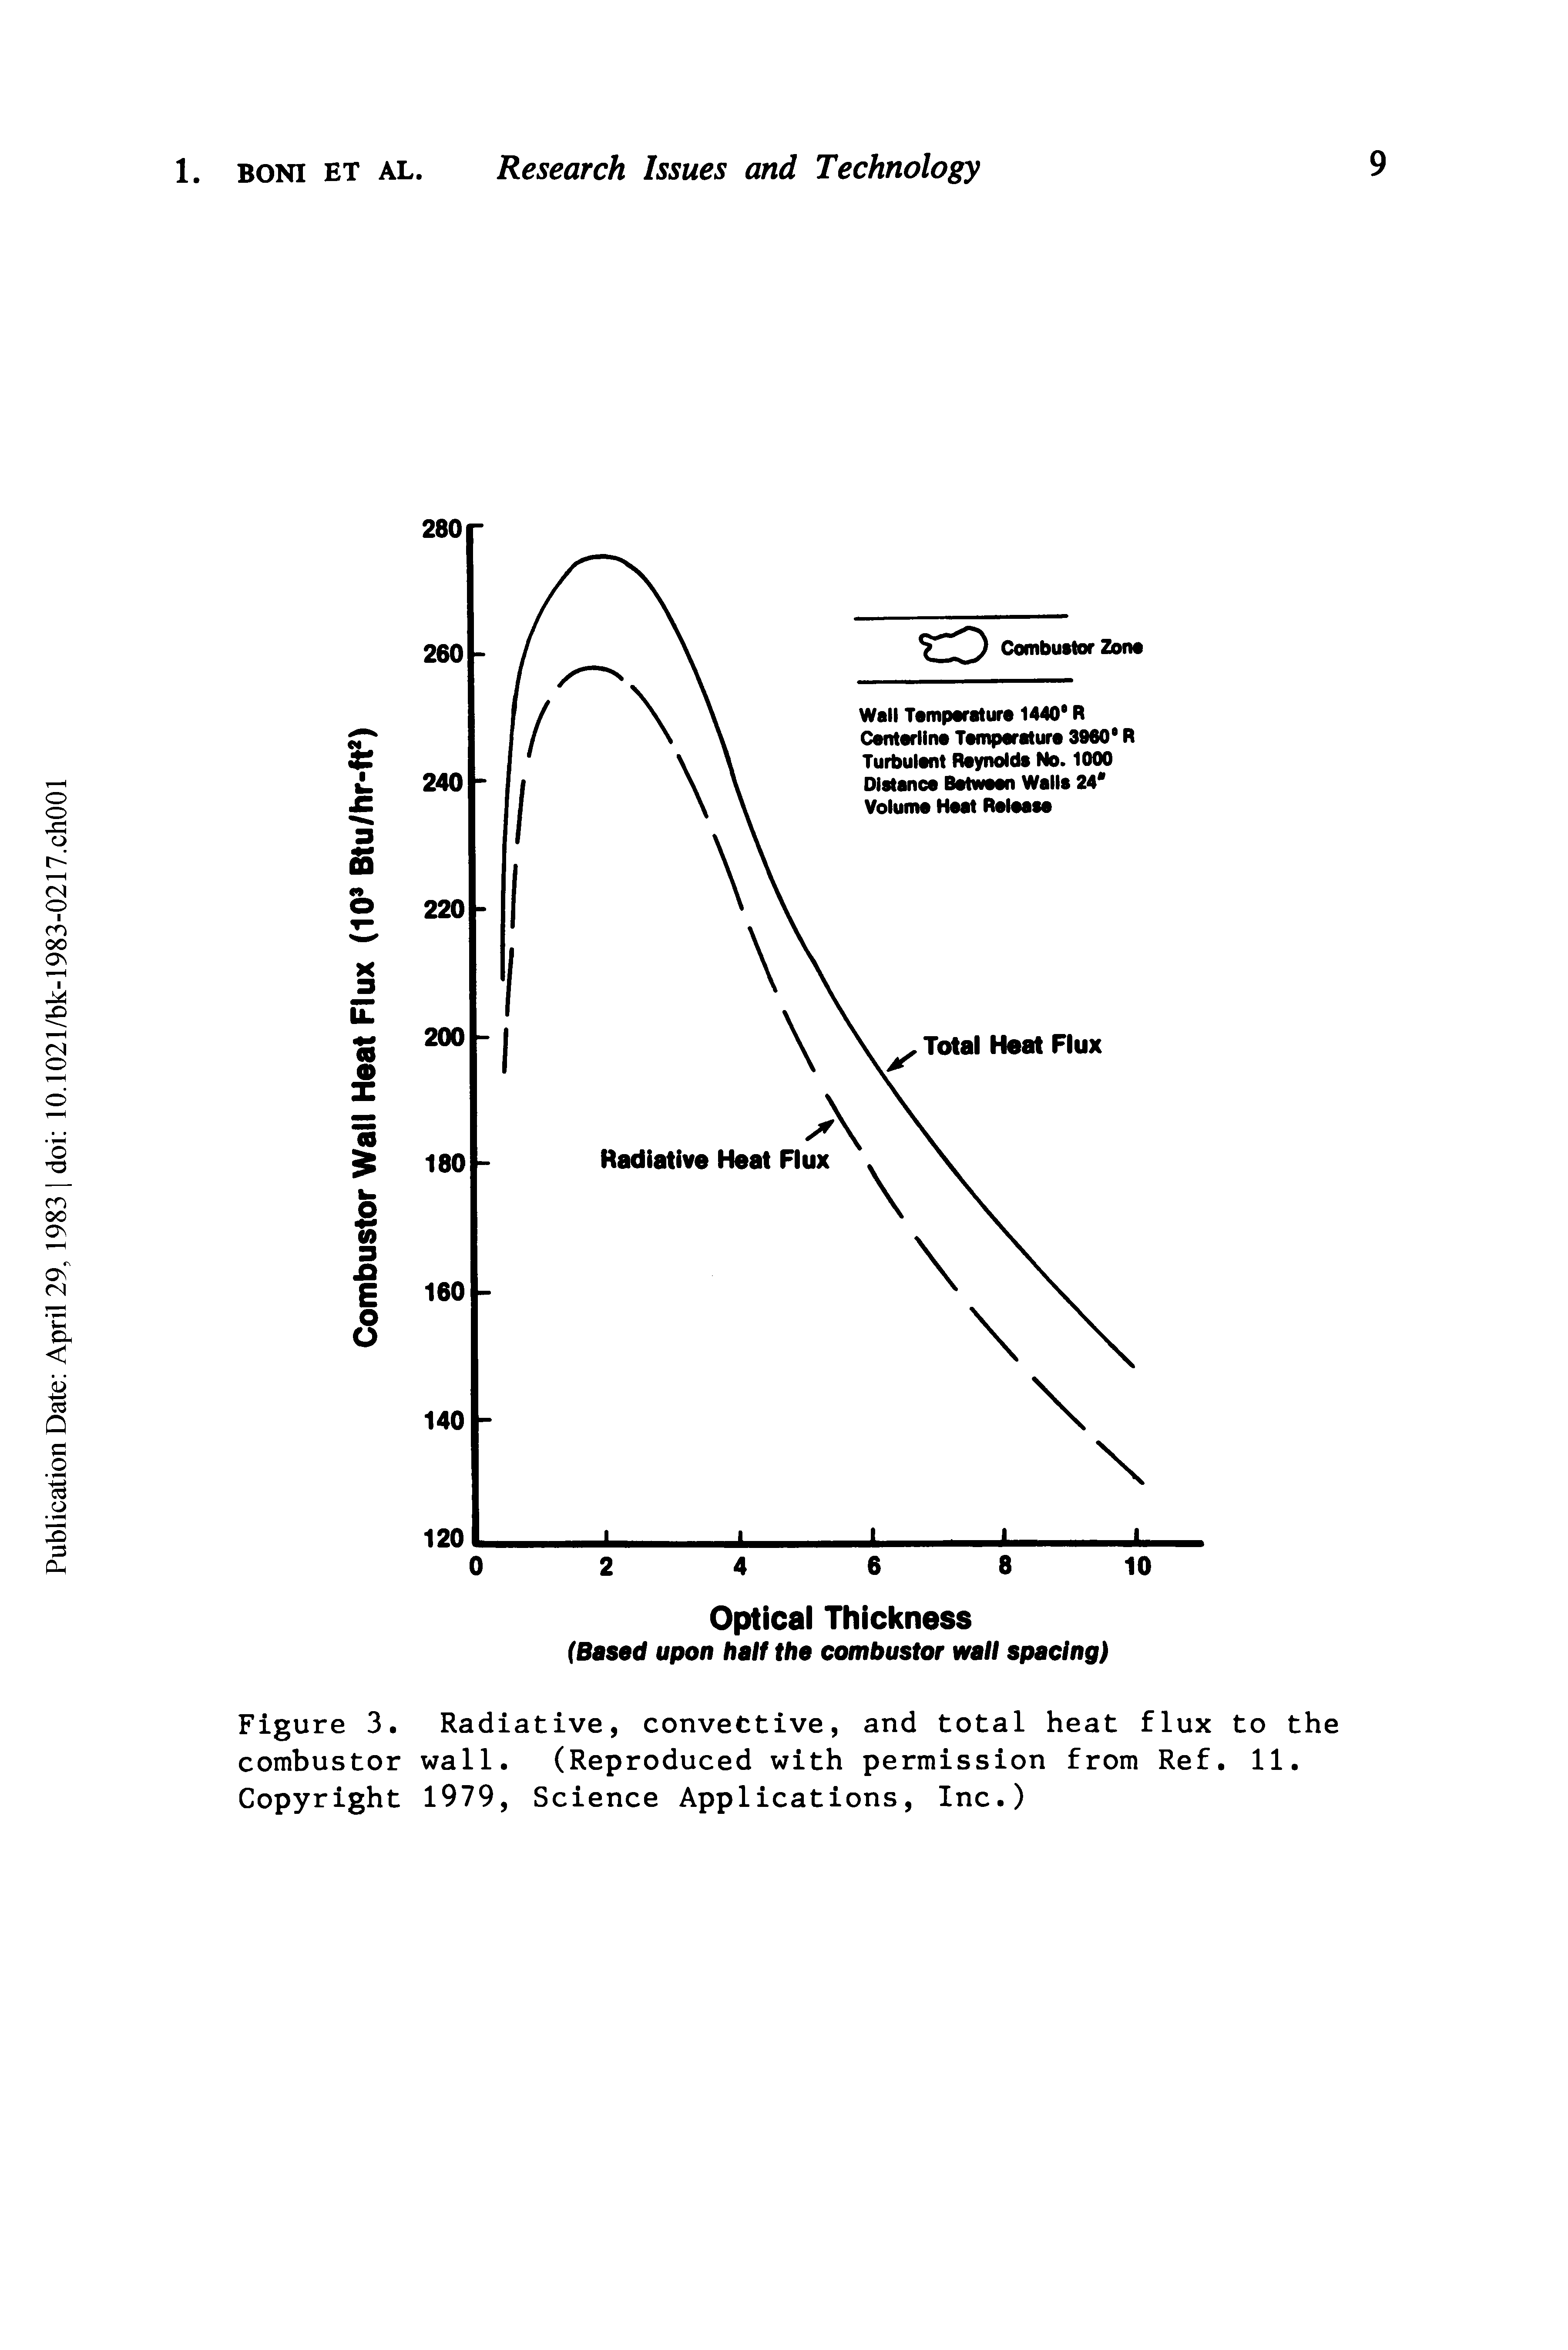 Figure 3. Radiative, convective, and total heat flux to the combustor wall. (Reproduced with permission from Ref. 11. Copyright 1979, Science Applications, Inc.)...